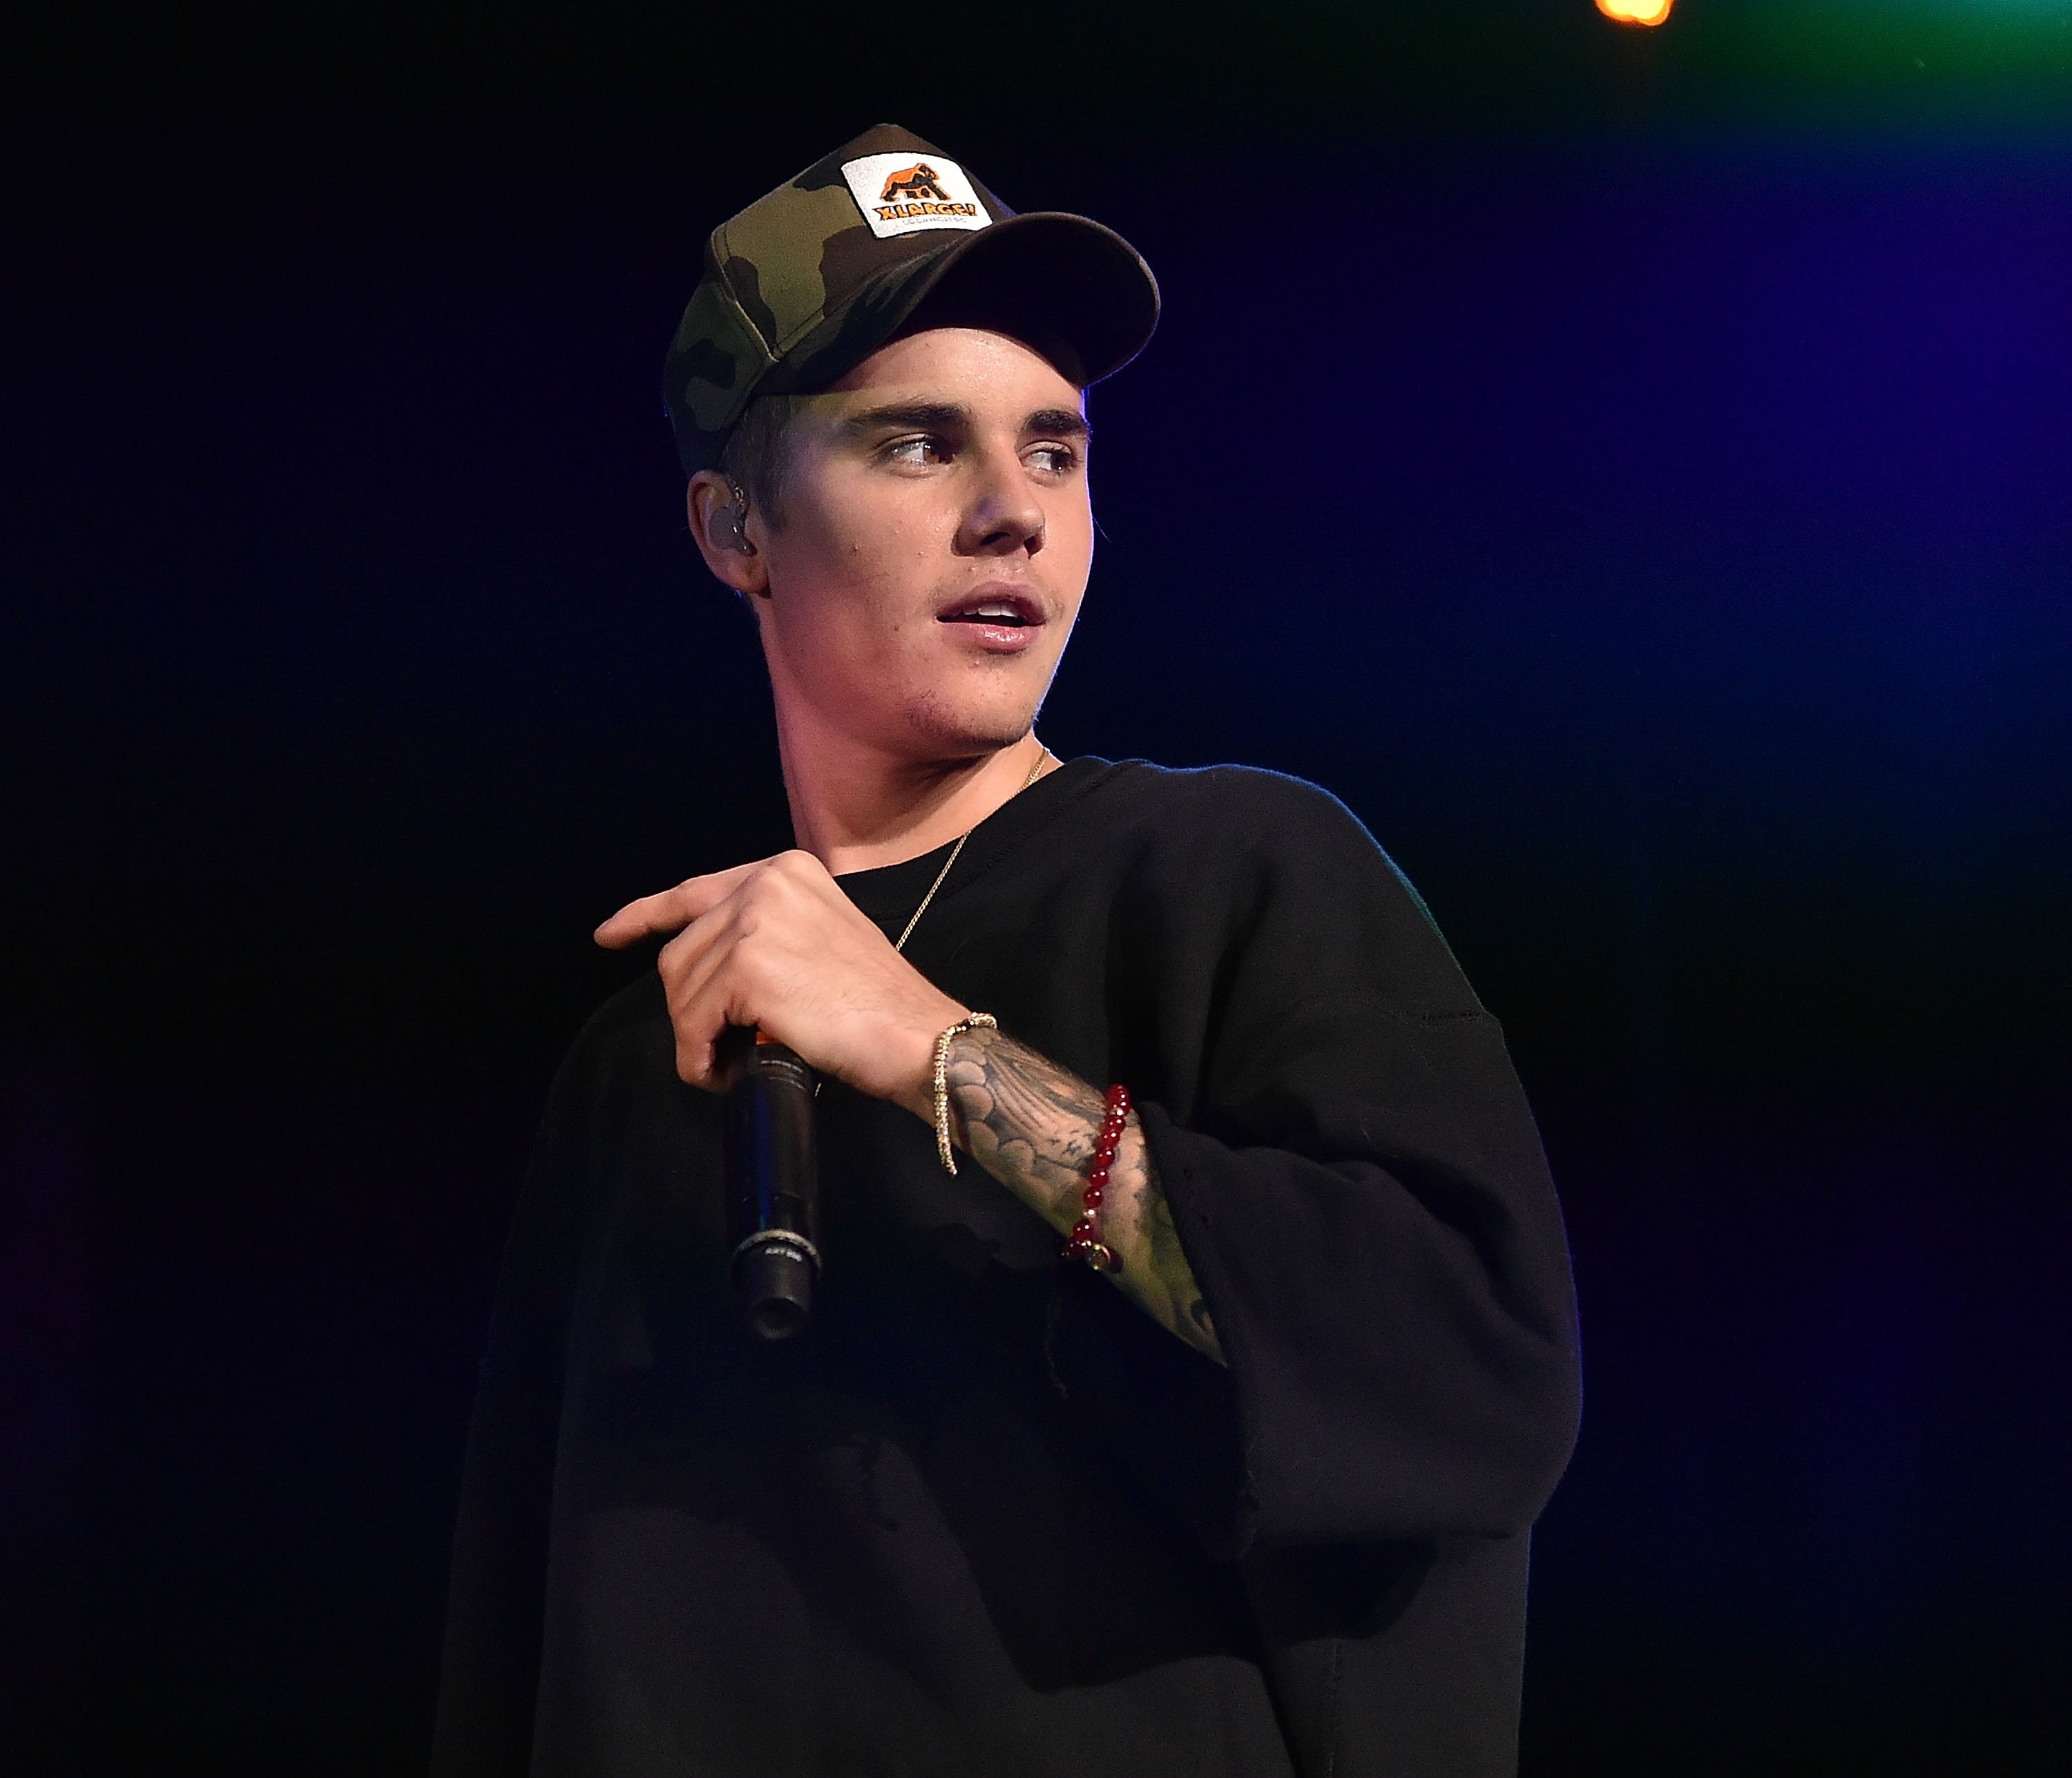 Justin Bieber during a 2015 performance in Atlanta. | Photo: Getty Images